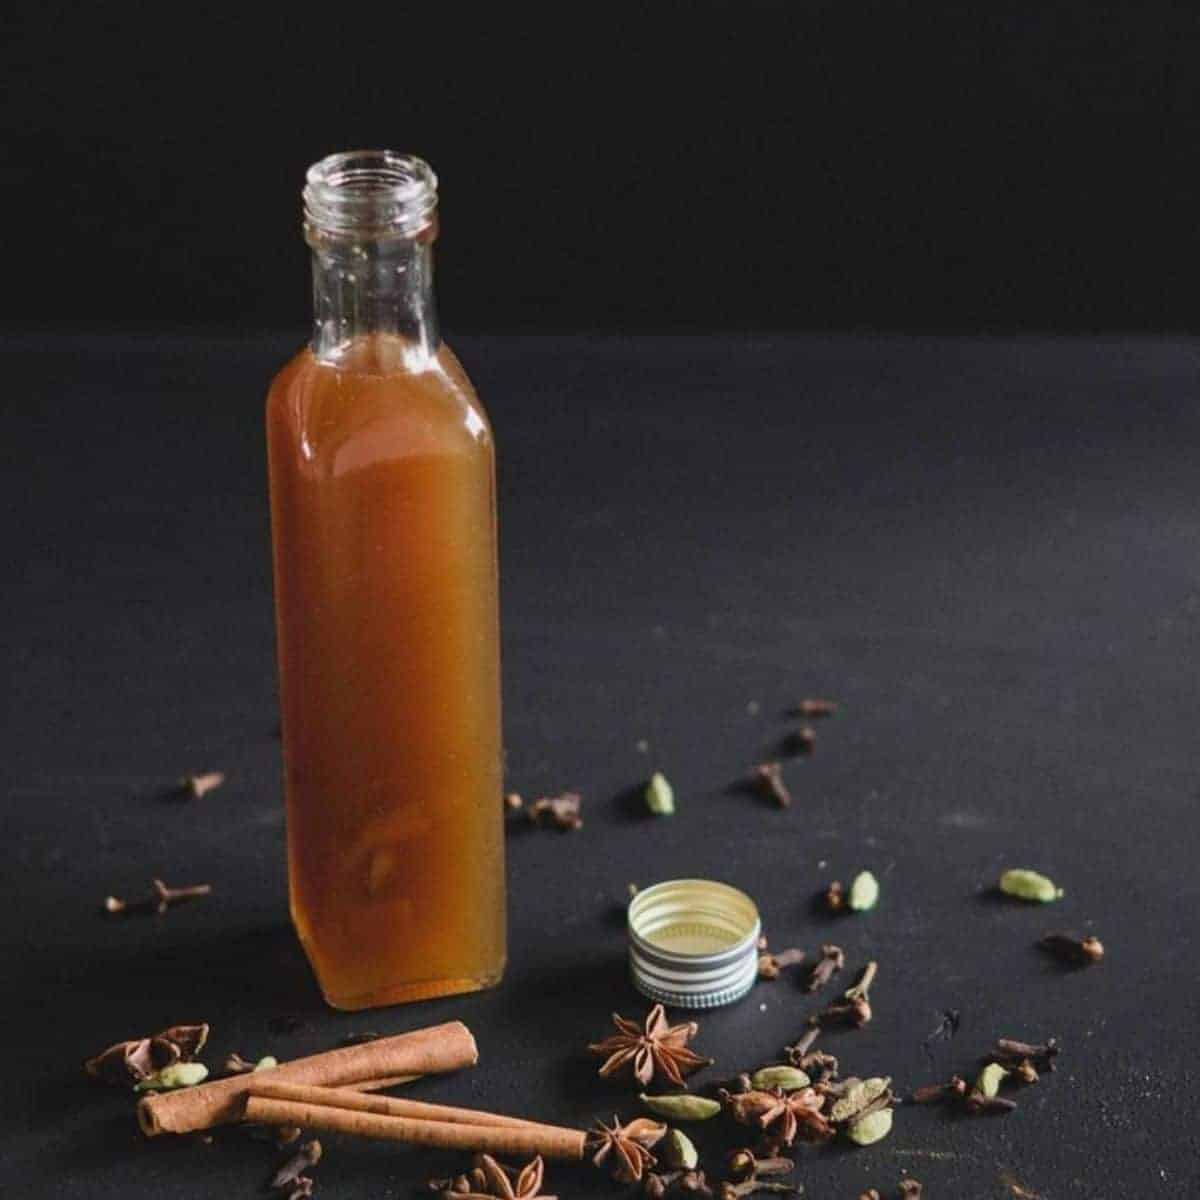 Spices messing up the table and a long transparent bottle filled with brownish liquid